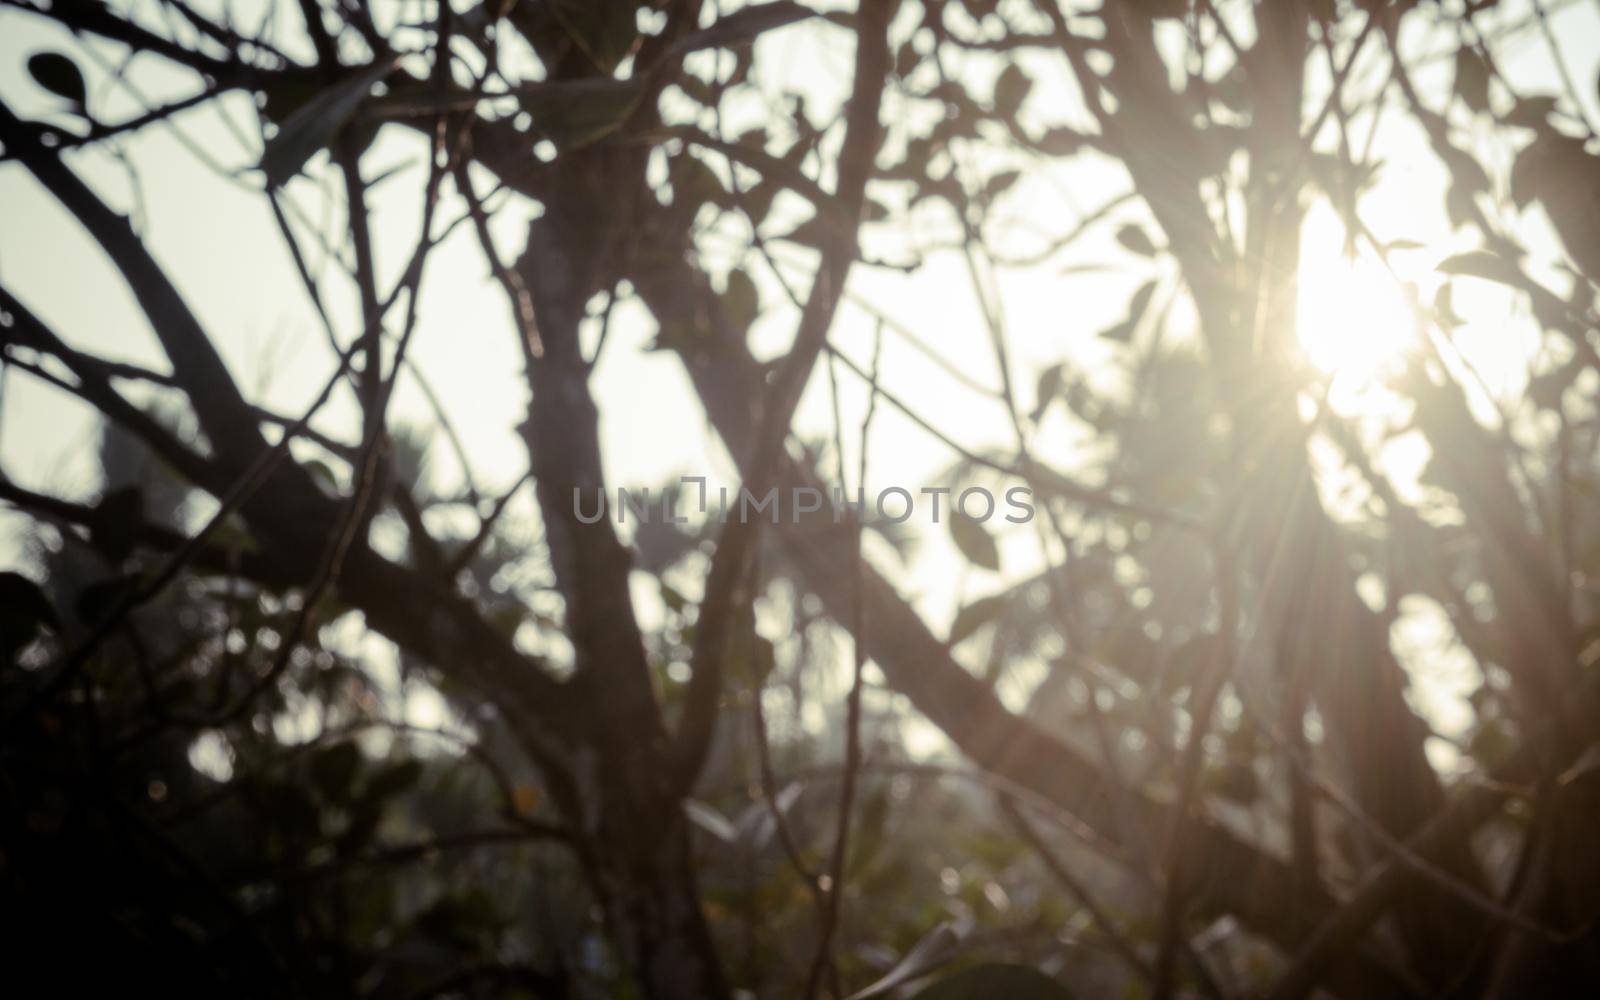 Morning Sunlight through tree leaves. Blur Forest Bush woodland environment in the foreground silhouette by back lit bright sunbeam. Beauty in nature Abstract Theme background image. Copy space.